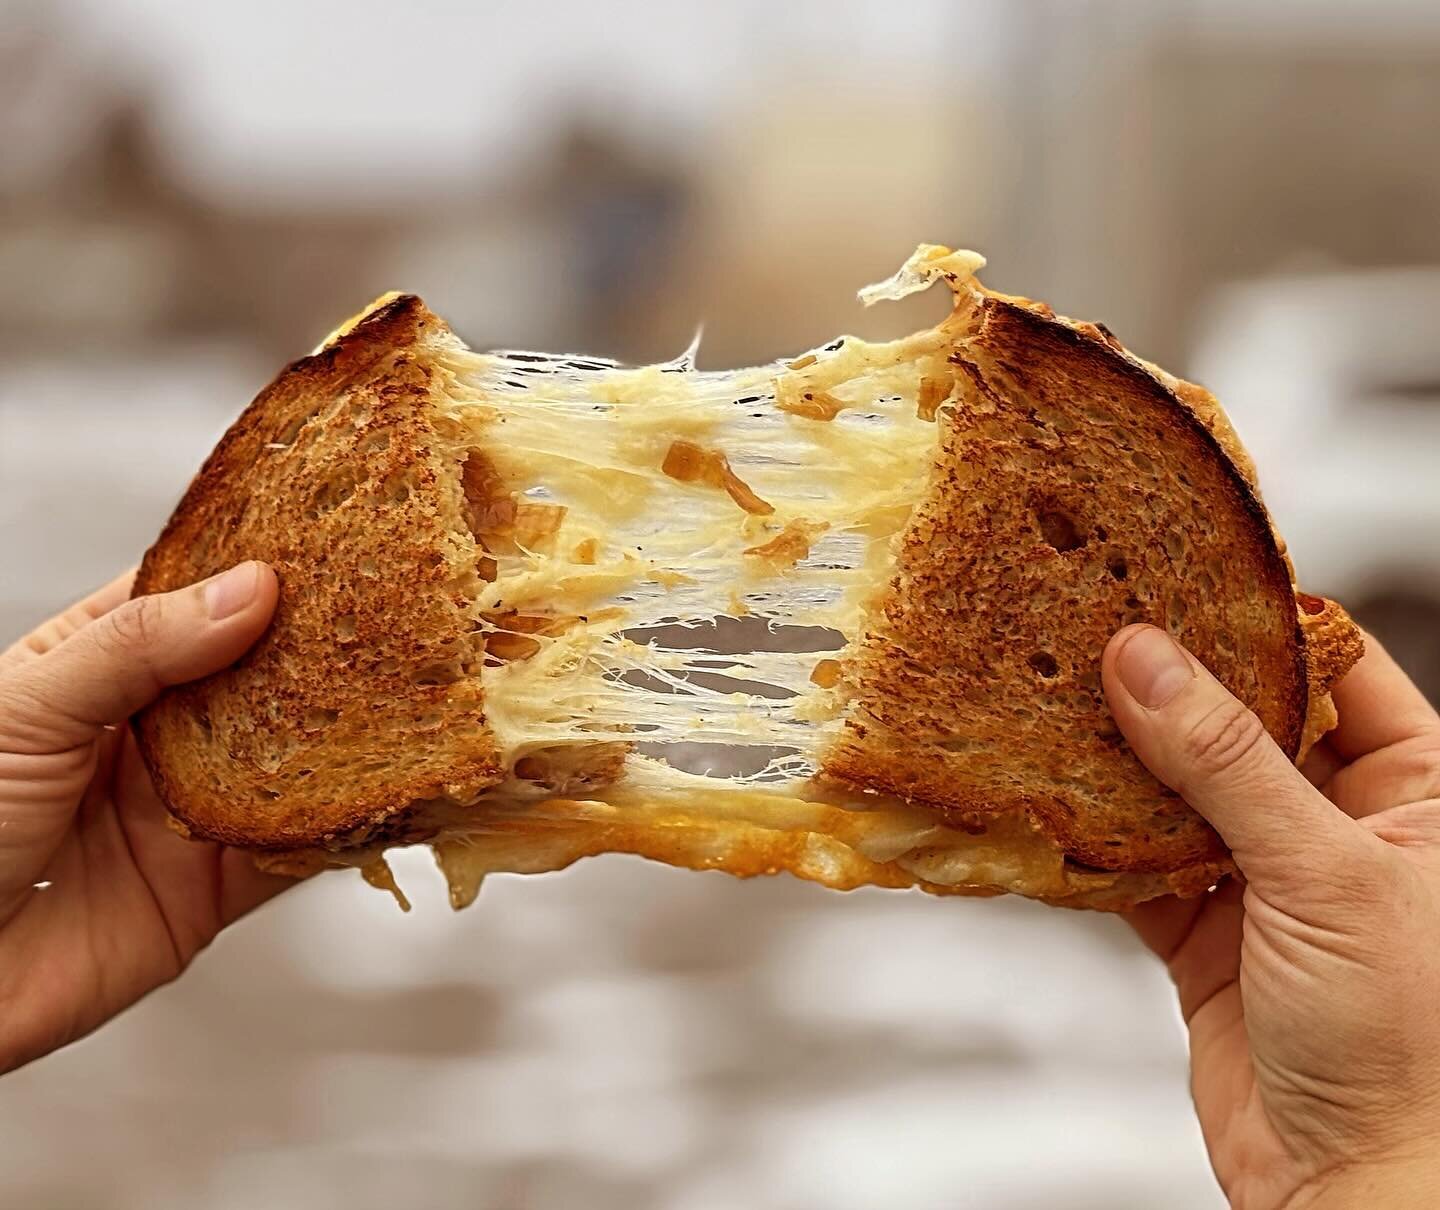 We are part of the Great Gorge Melt that supports @columbiagorgefoodbank. We will be donating $2 for every grilled cheese sold in the month of March. Come by and have a grilled cheese this month to help support feeding our community!!

#grilledcheese